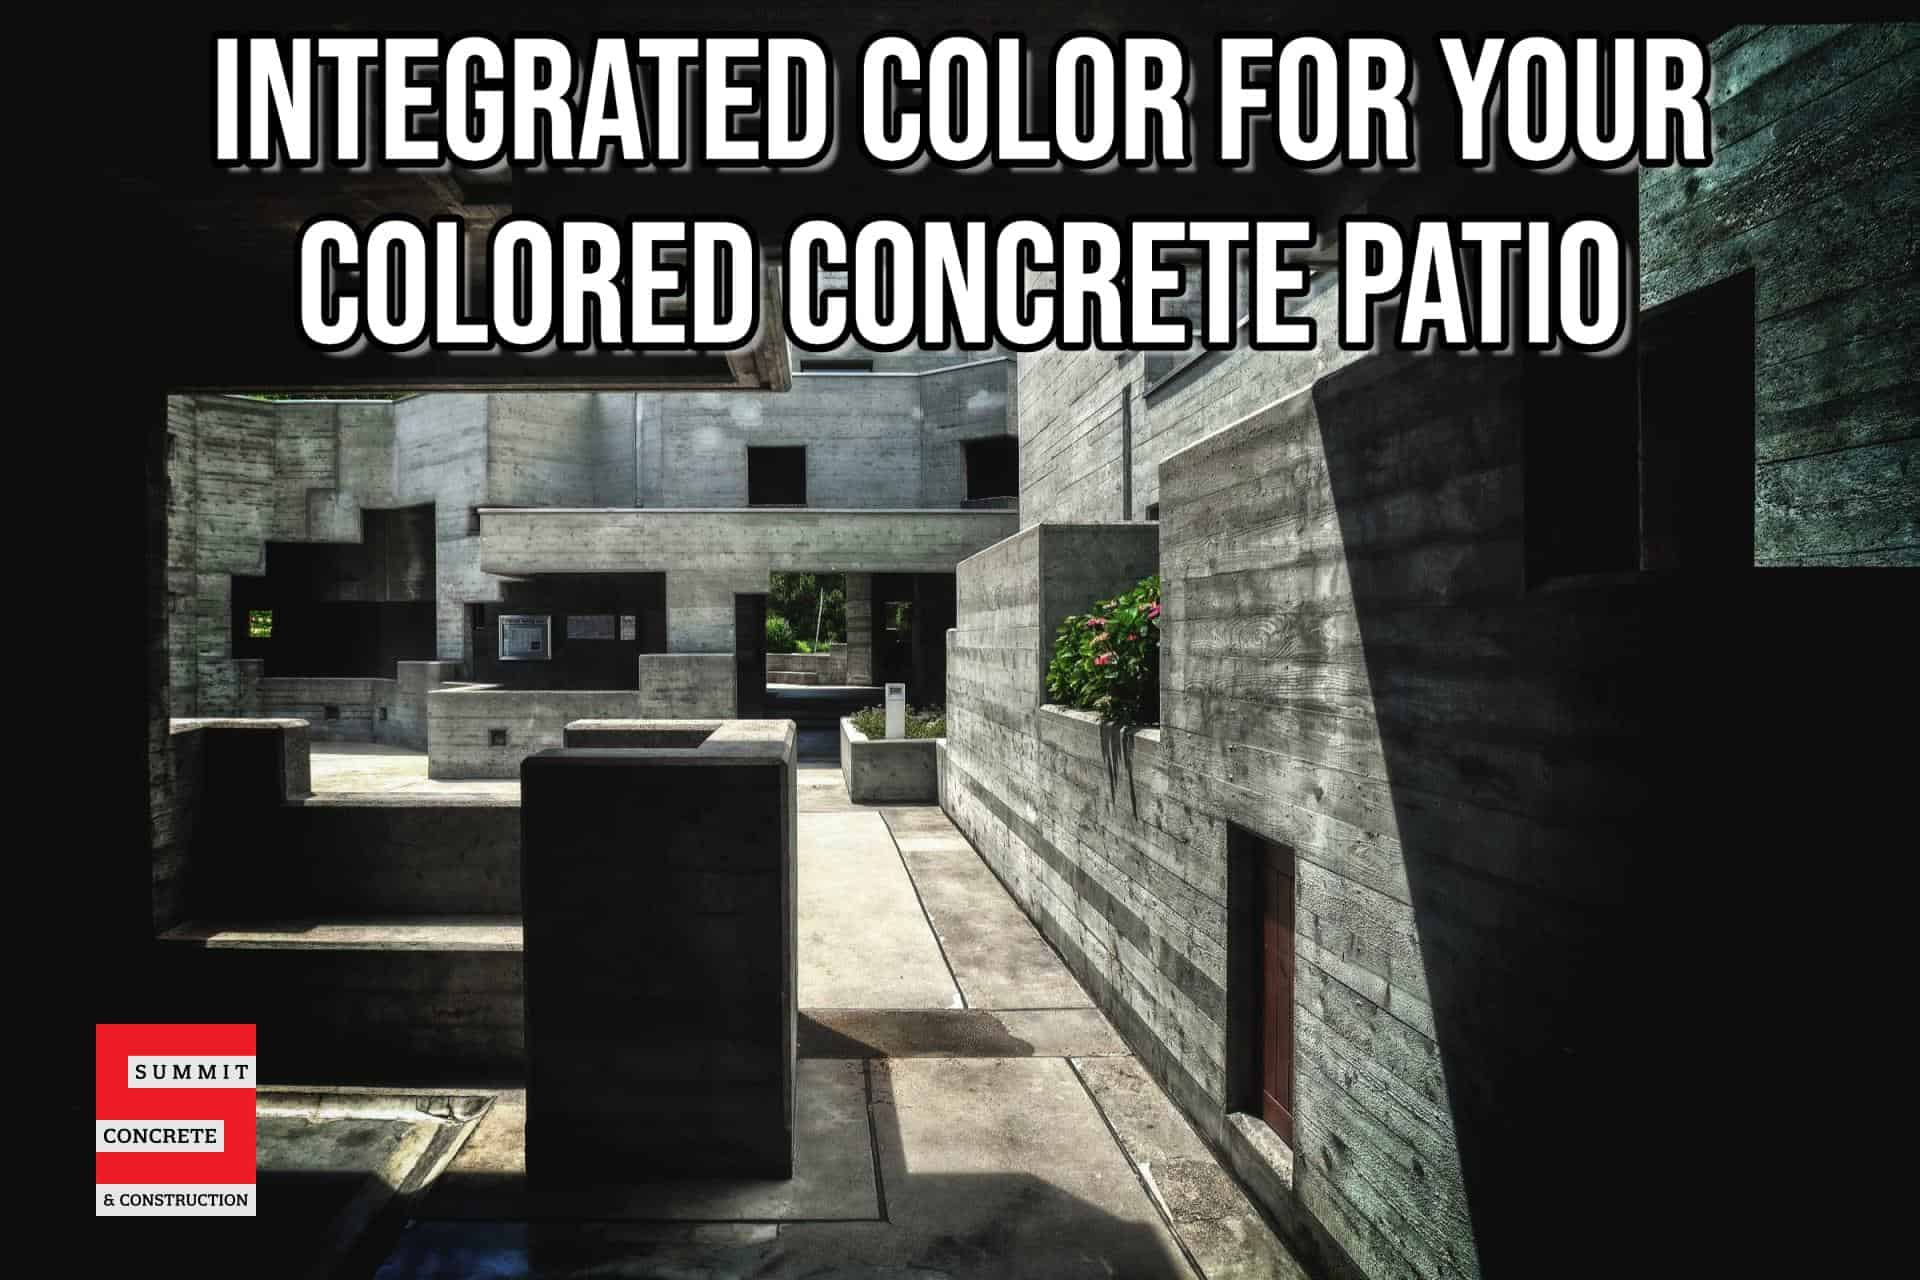 7 Reasons to Use Integrated Color for Your Colored Concrete Patio